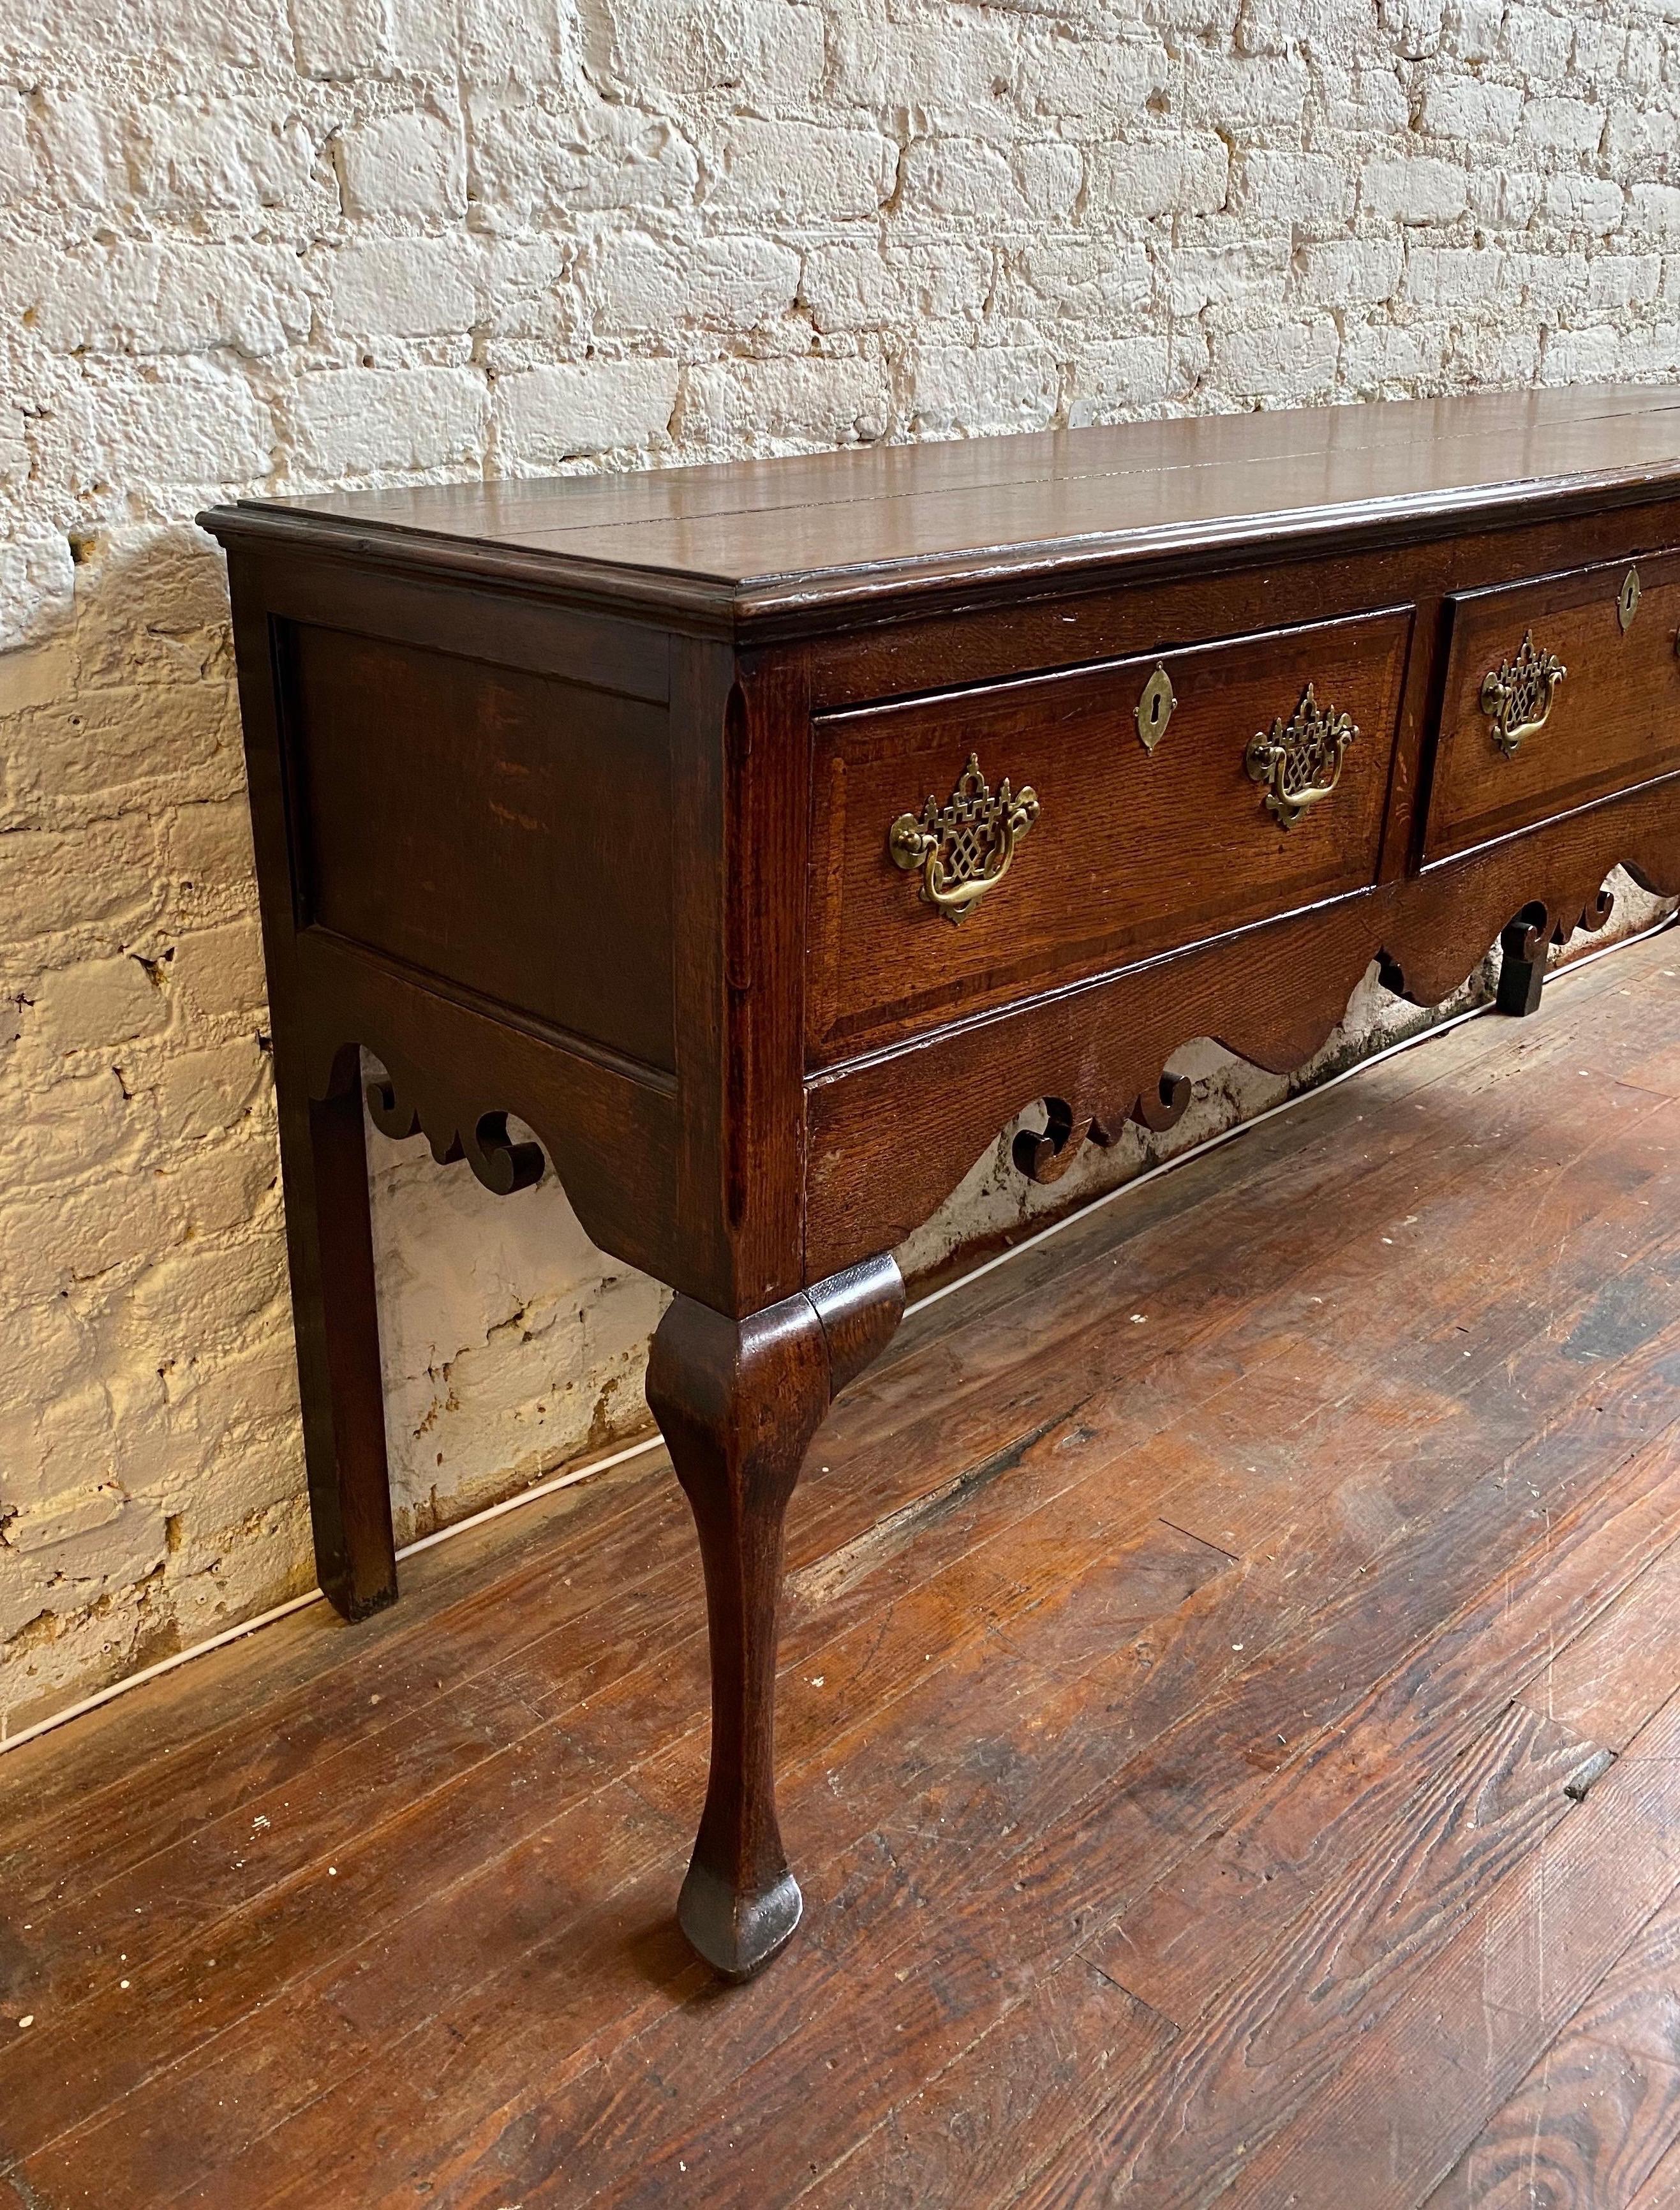 19th century oak welsh dresser base- two board top over three crossbanded drawers, a carved apron, cabriole legs and slipper feet. Great color and patina.